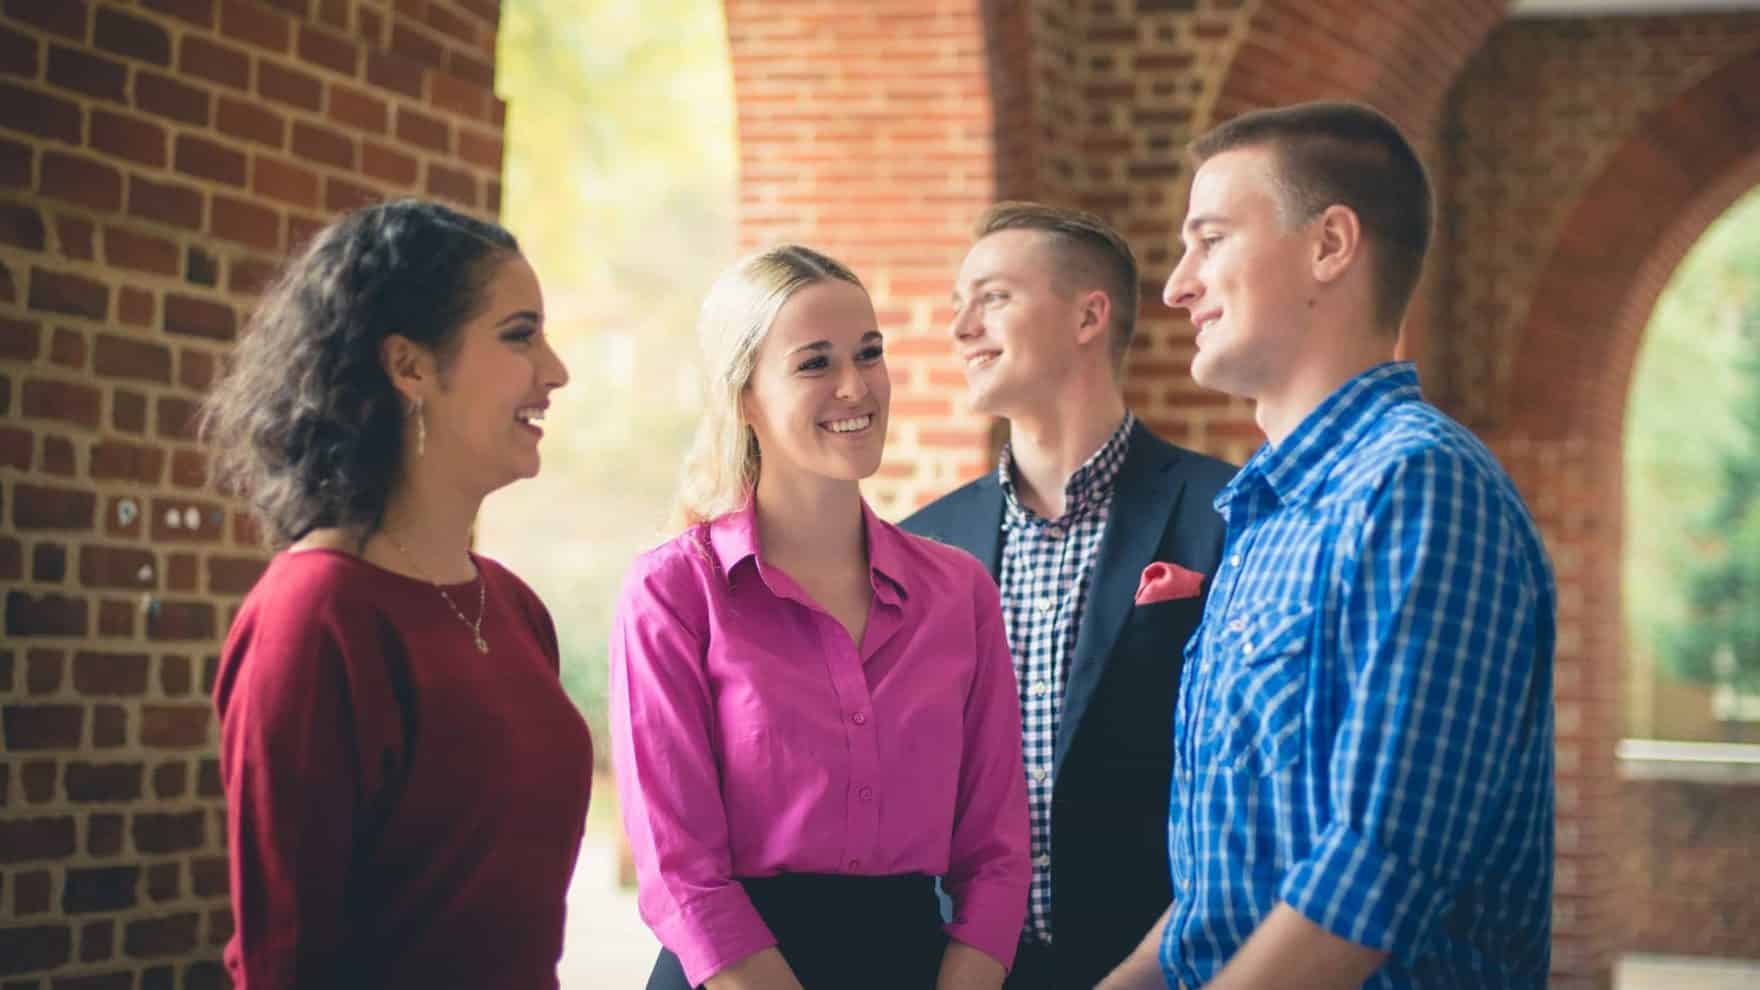 Students interact at Regent University, which offers psychology and counseling degree programs.